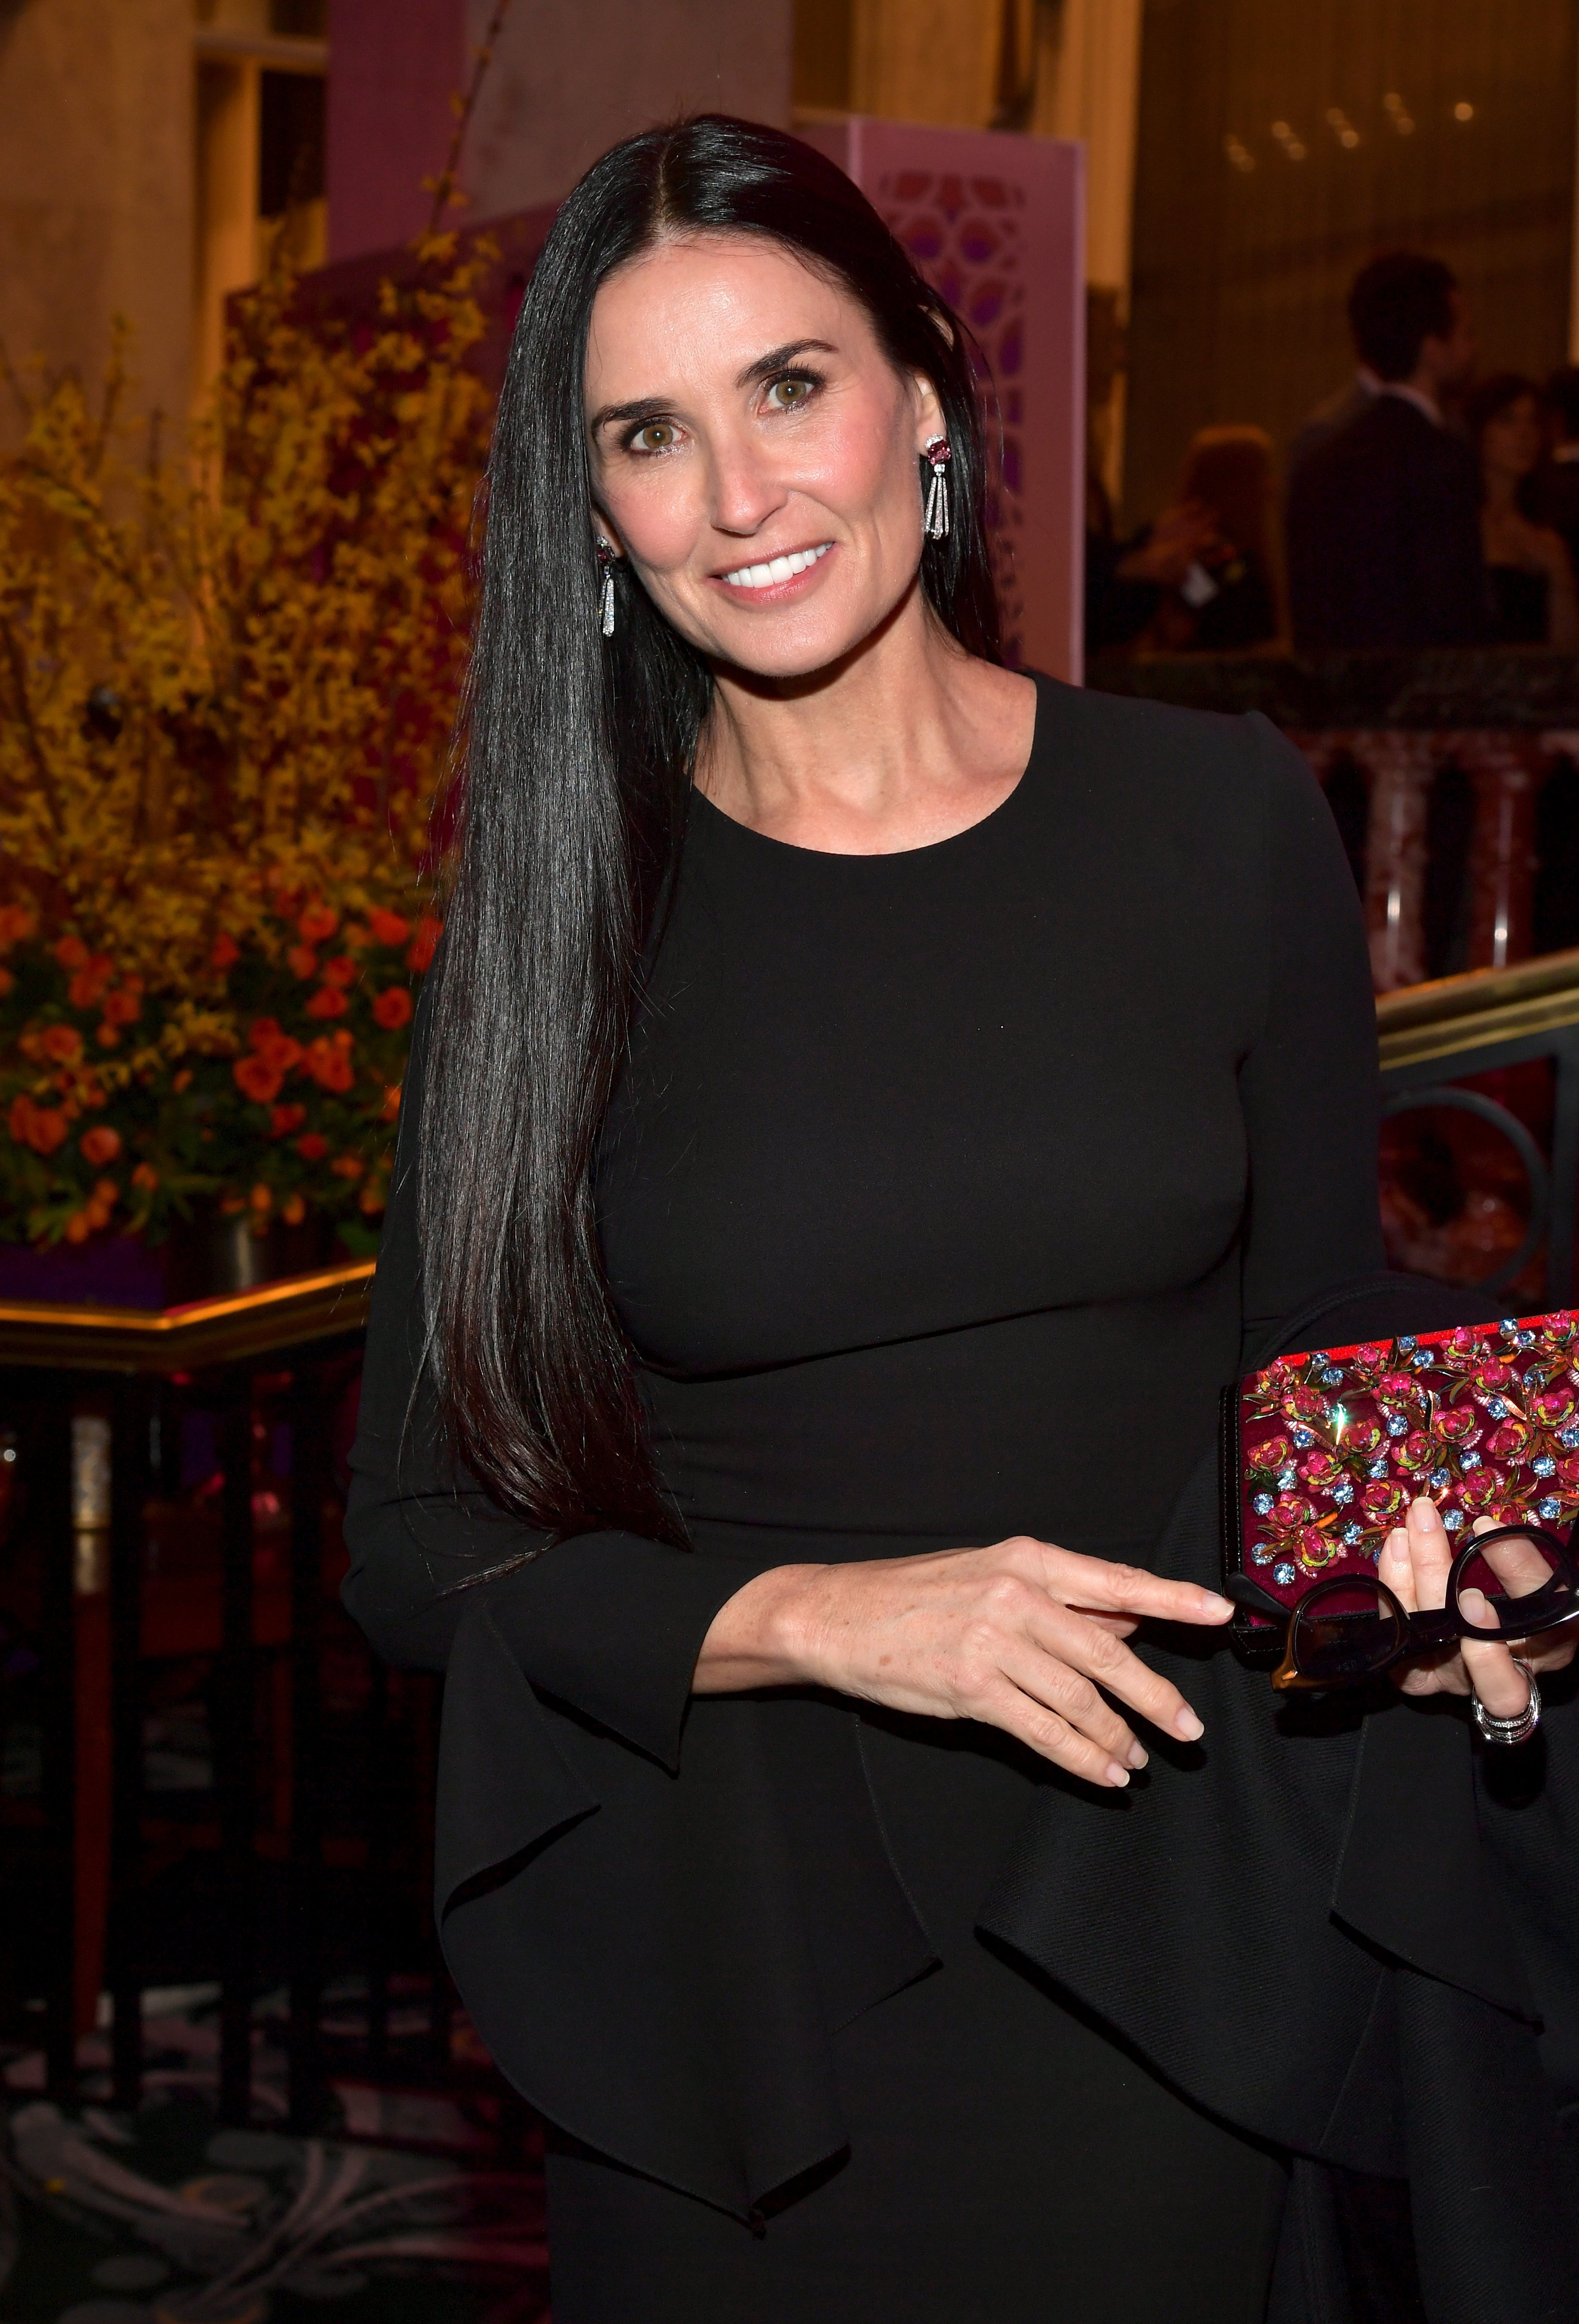  Demi Moore during "The Women's Cancer Research Fund's An Unforgettable Evening Benefit Gala. | Source: Getty Images